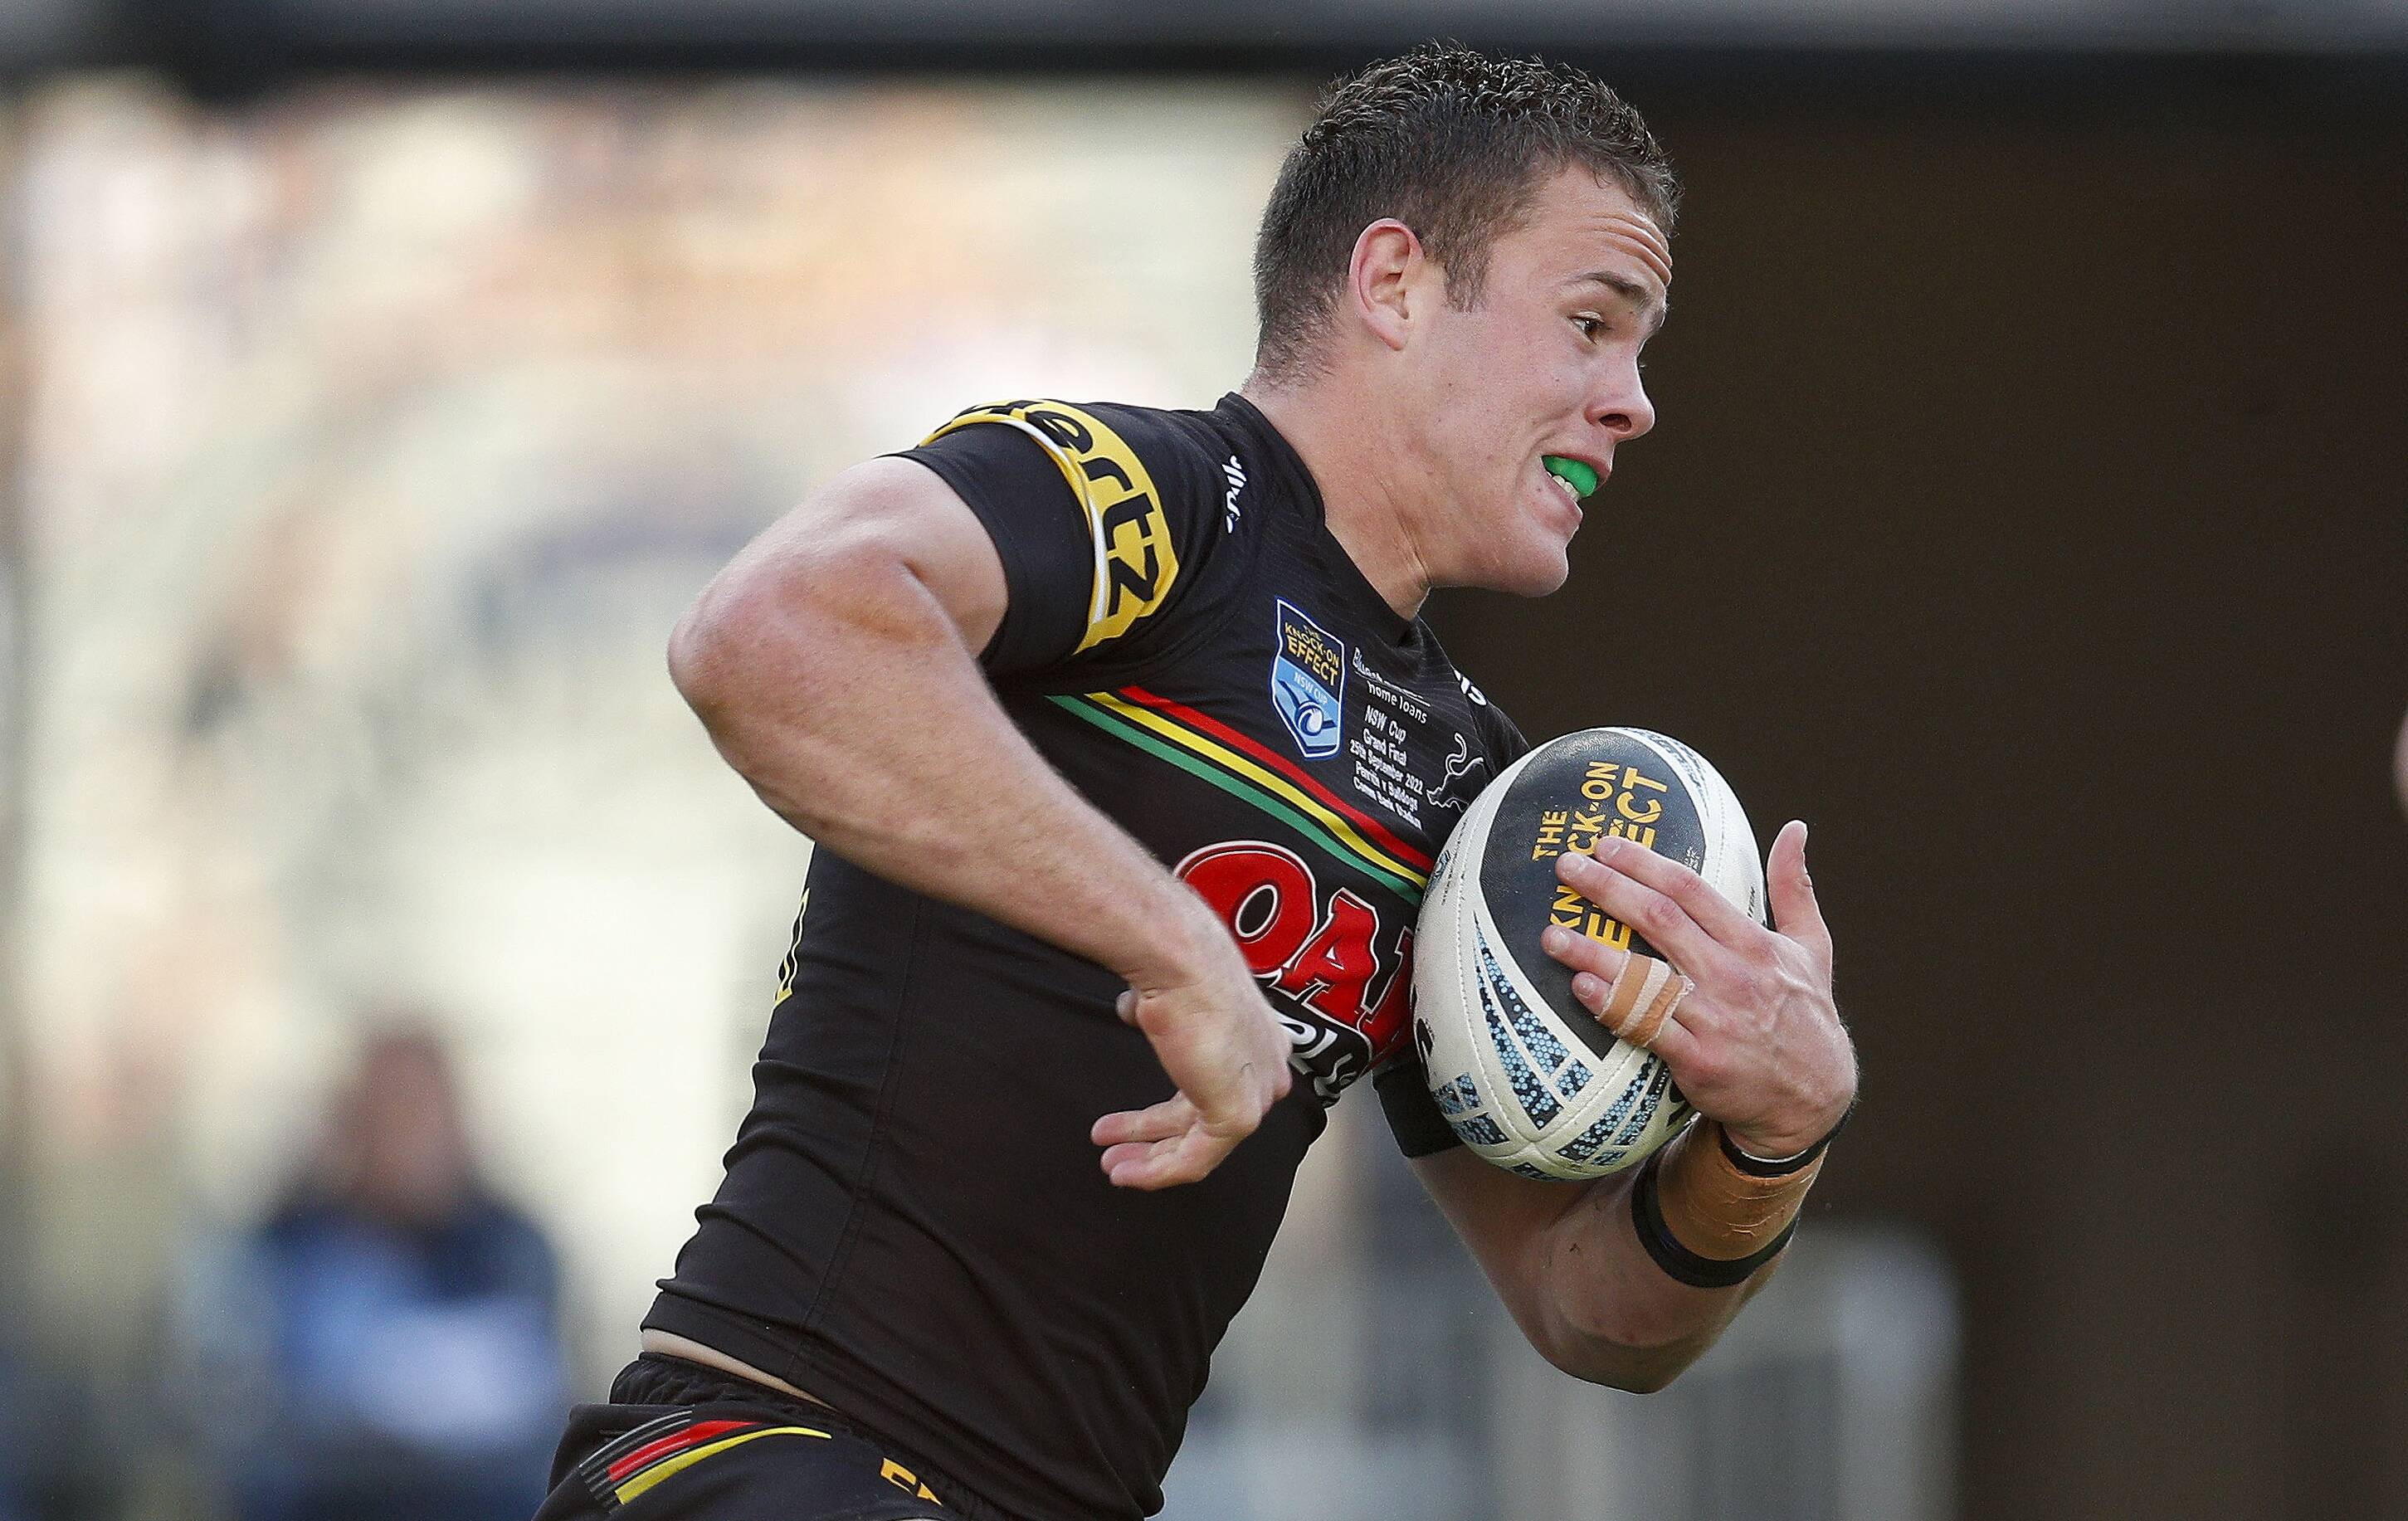 Blayney junior Liam Henry re-signs for the Penrith Panthers until the end  of 2026, as Bathurst talents feature in Sydney | Western Advocate |  Bathurst, NSW